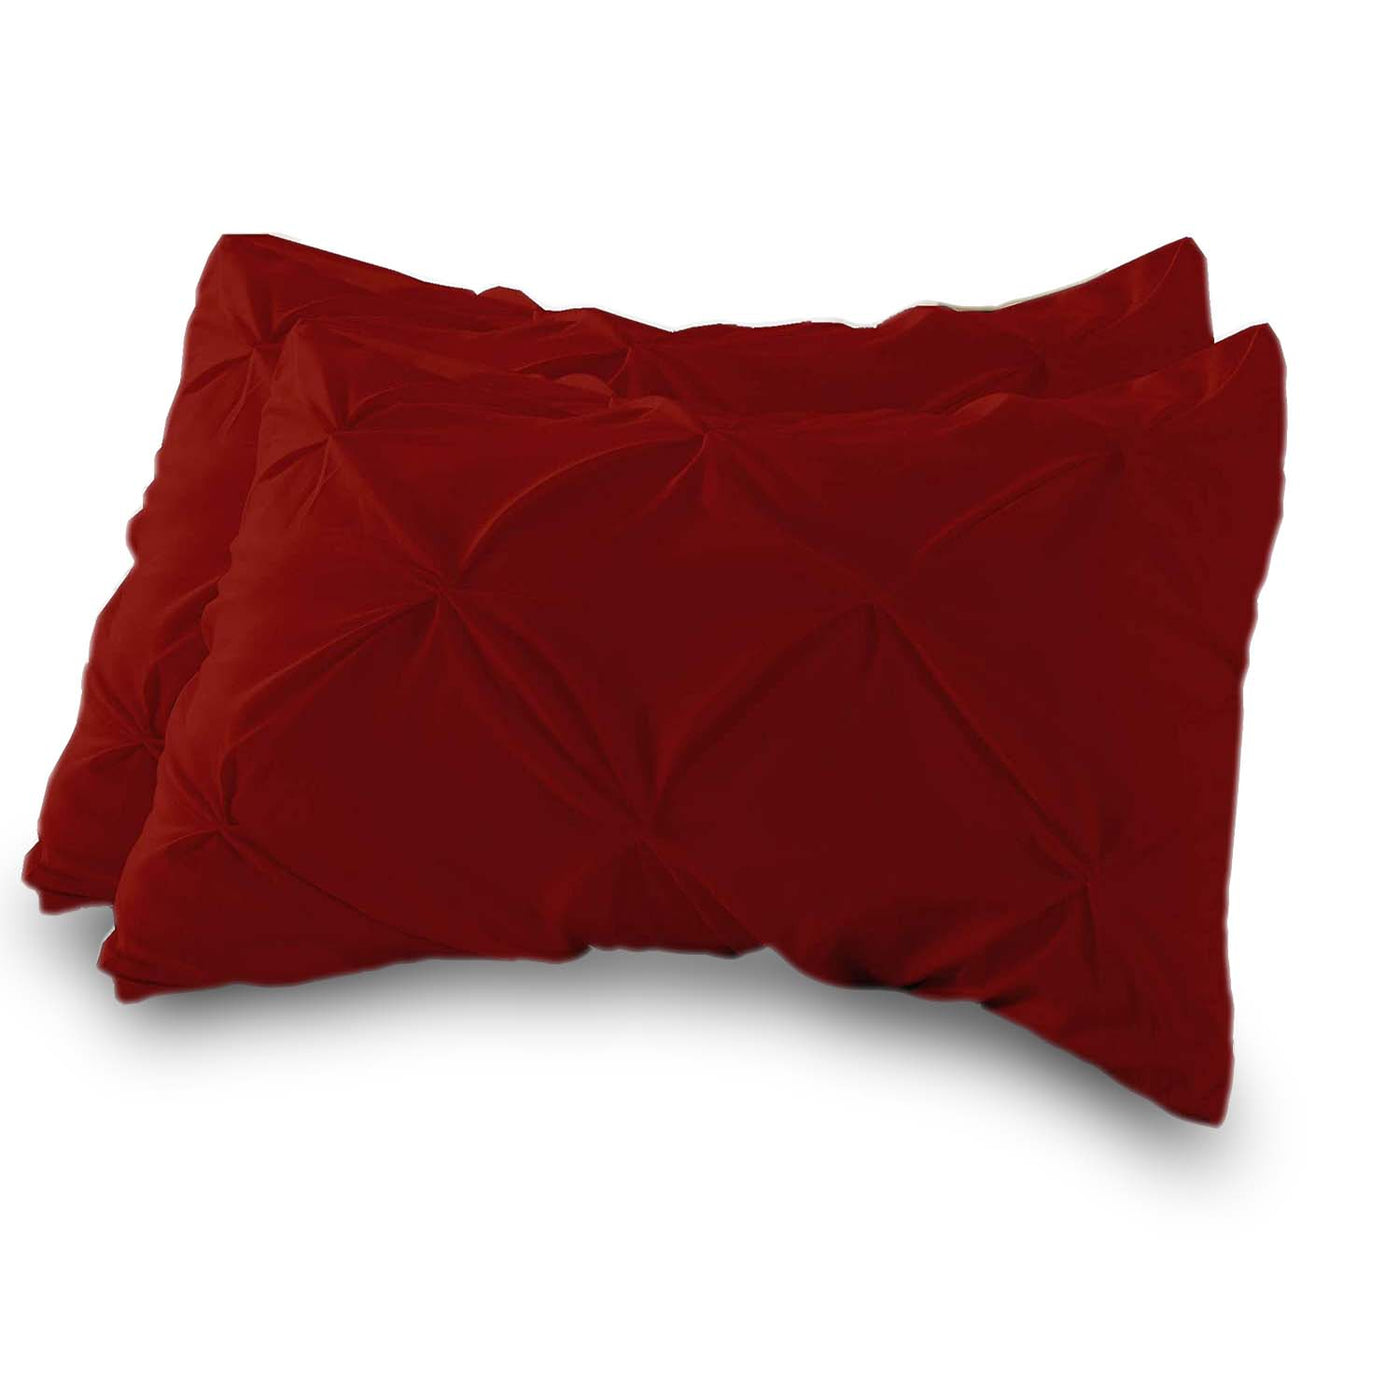 Set Of 2 - 300 TC Egyptian Cotton Pinch Pleated Pillow Covers - Burgundy